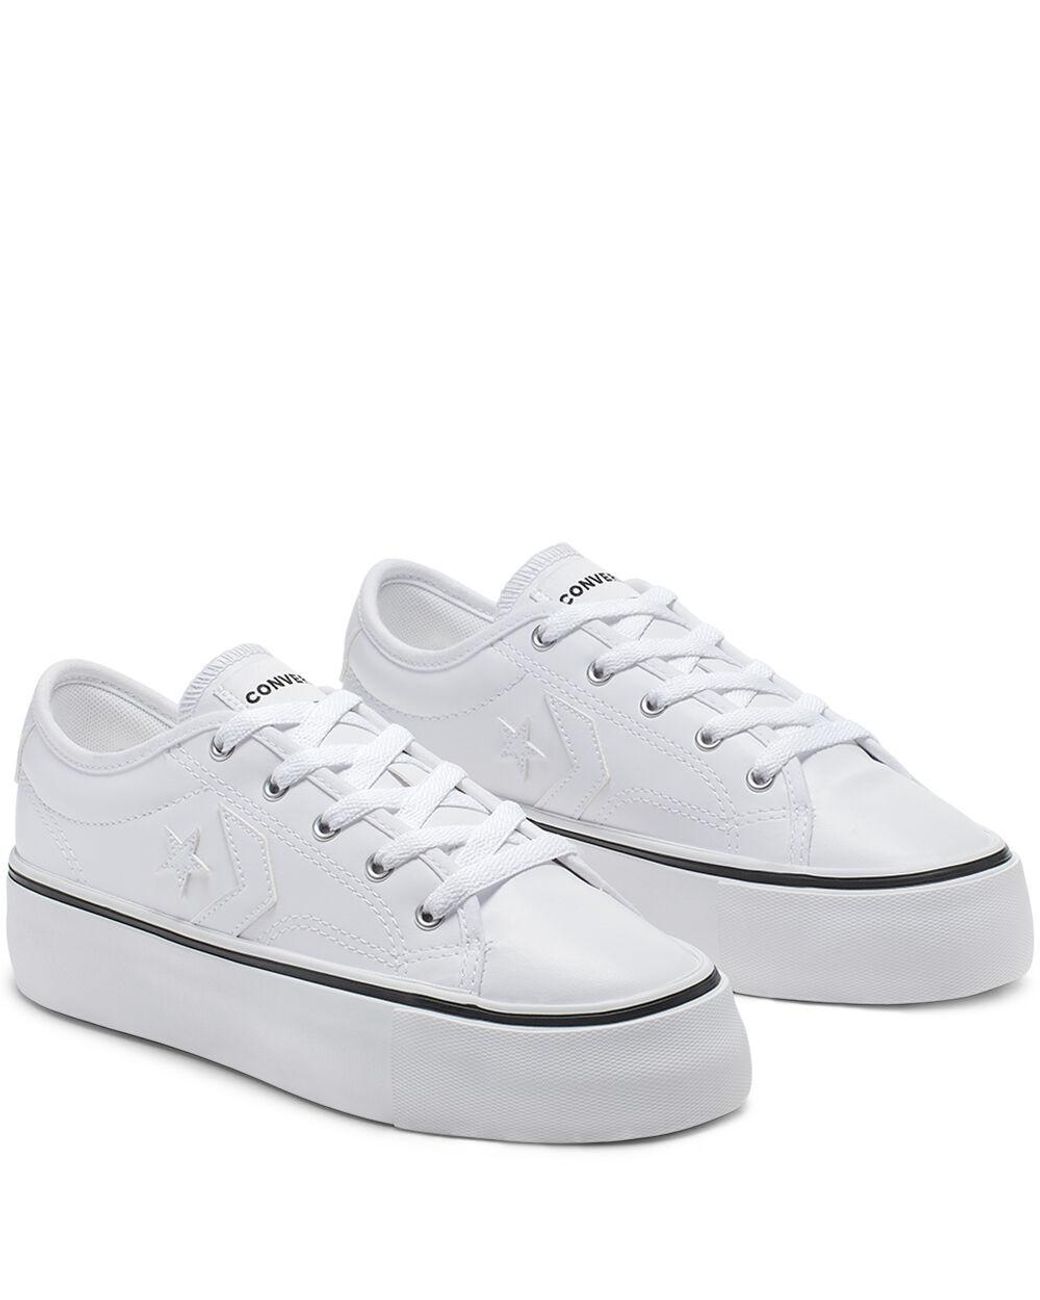 Converse Star Replay Platform Low Top in White | Lyst UK